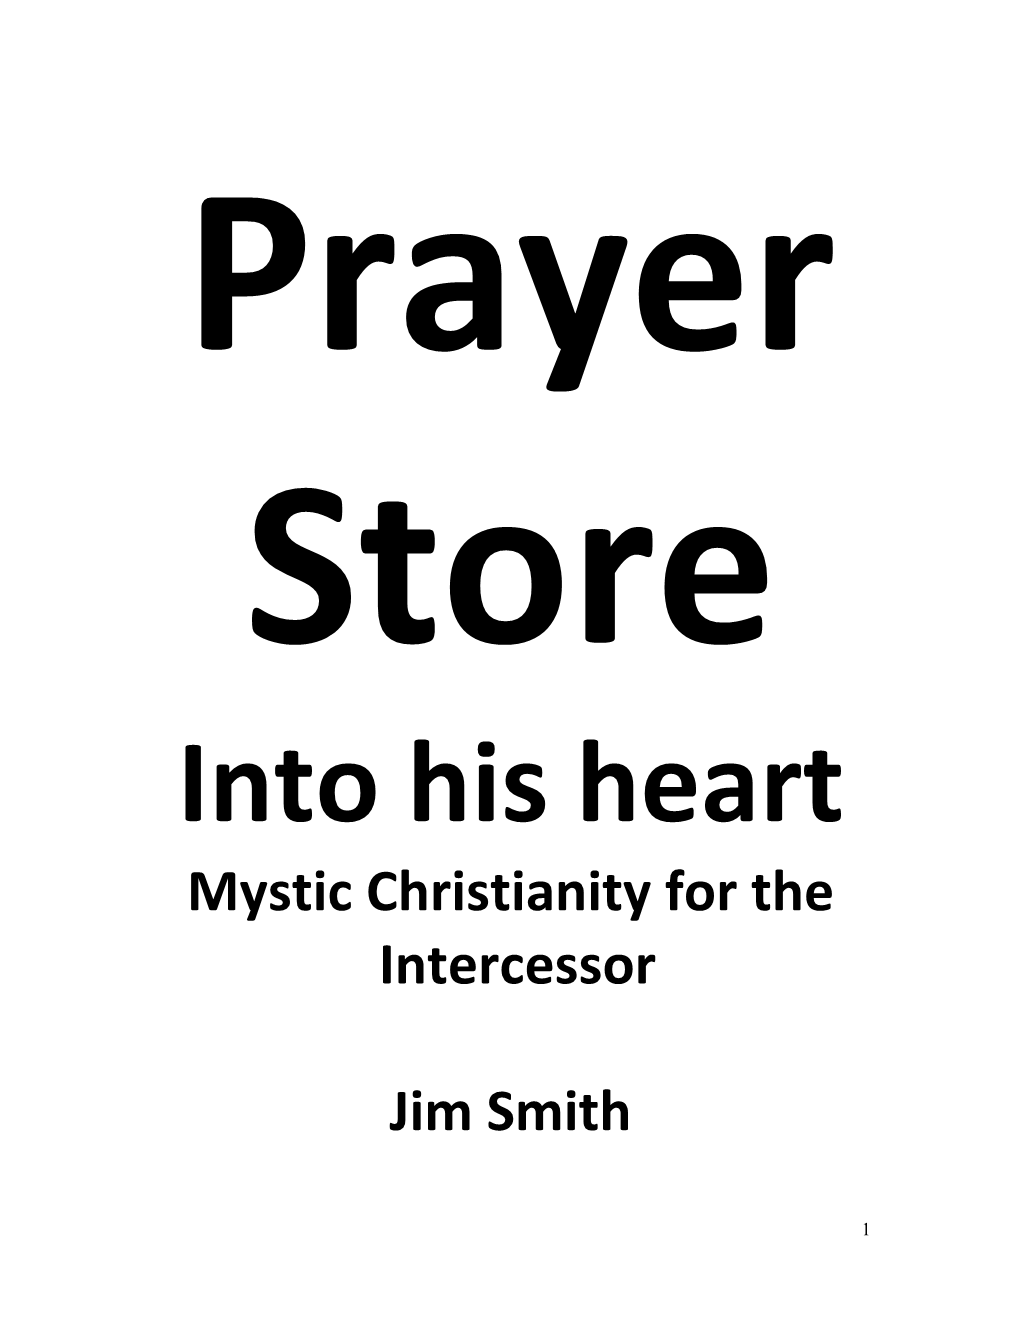 Mystic Christianity for the Intercessor Jim Smith